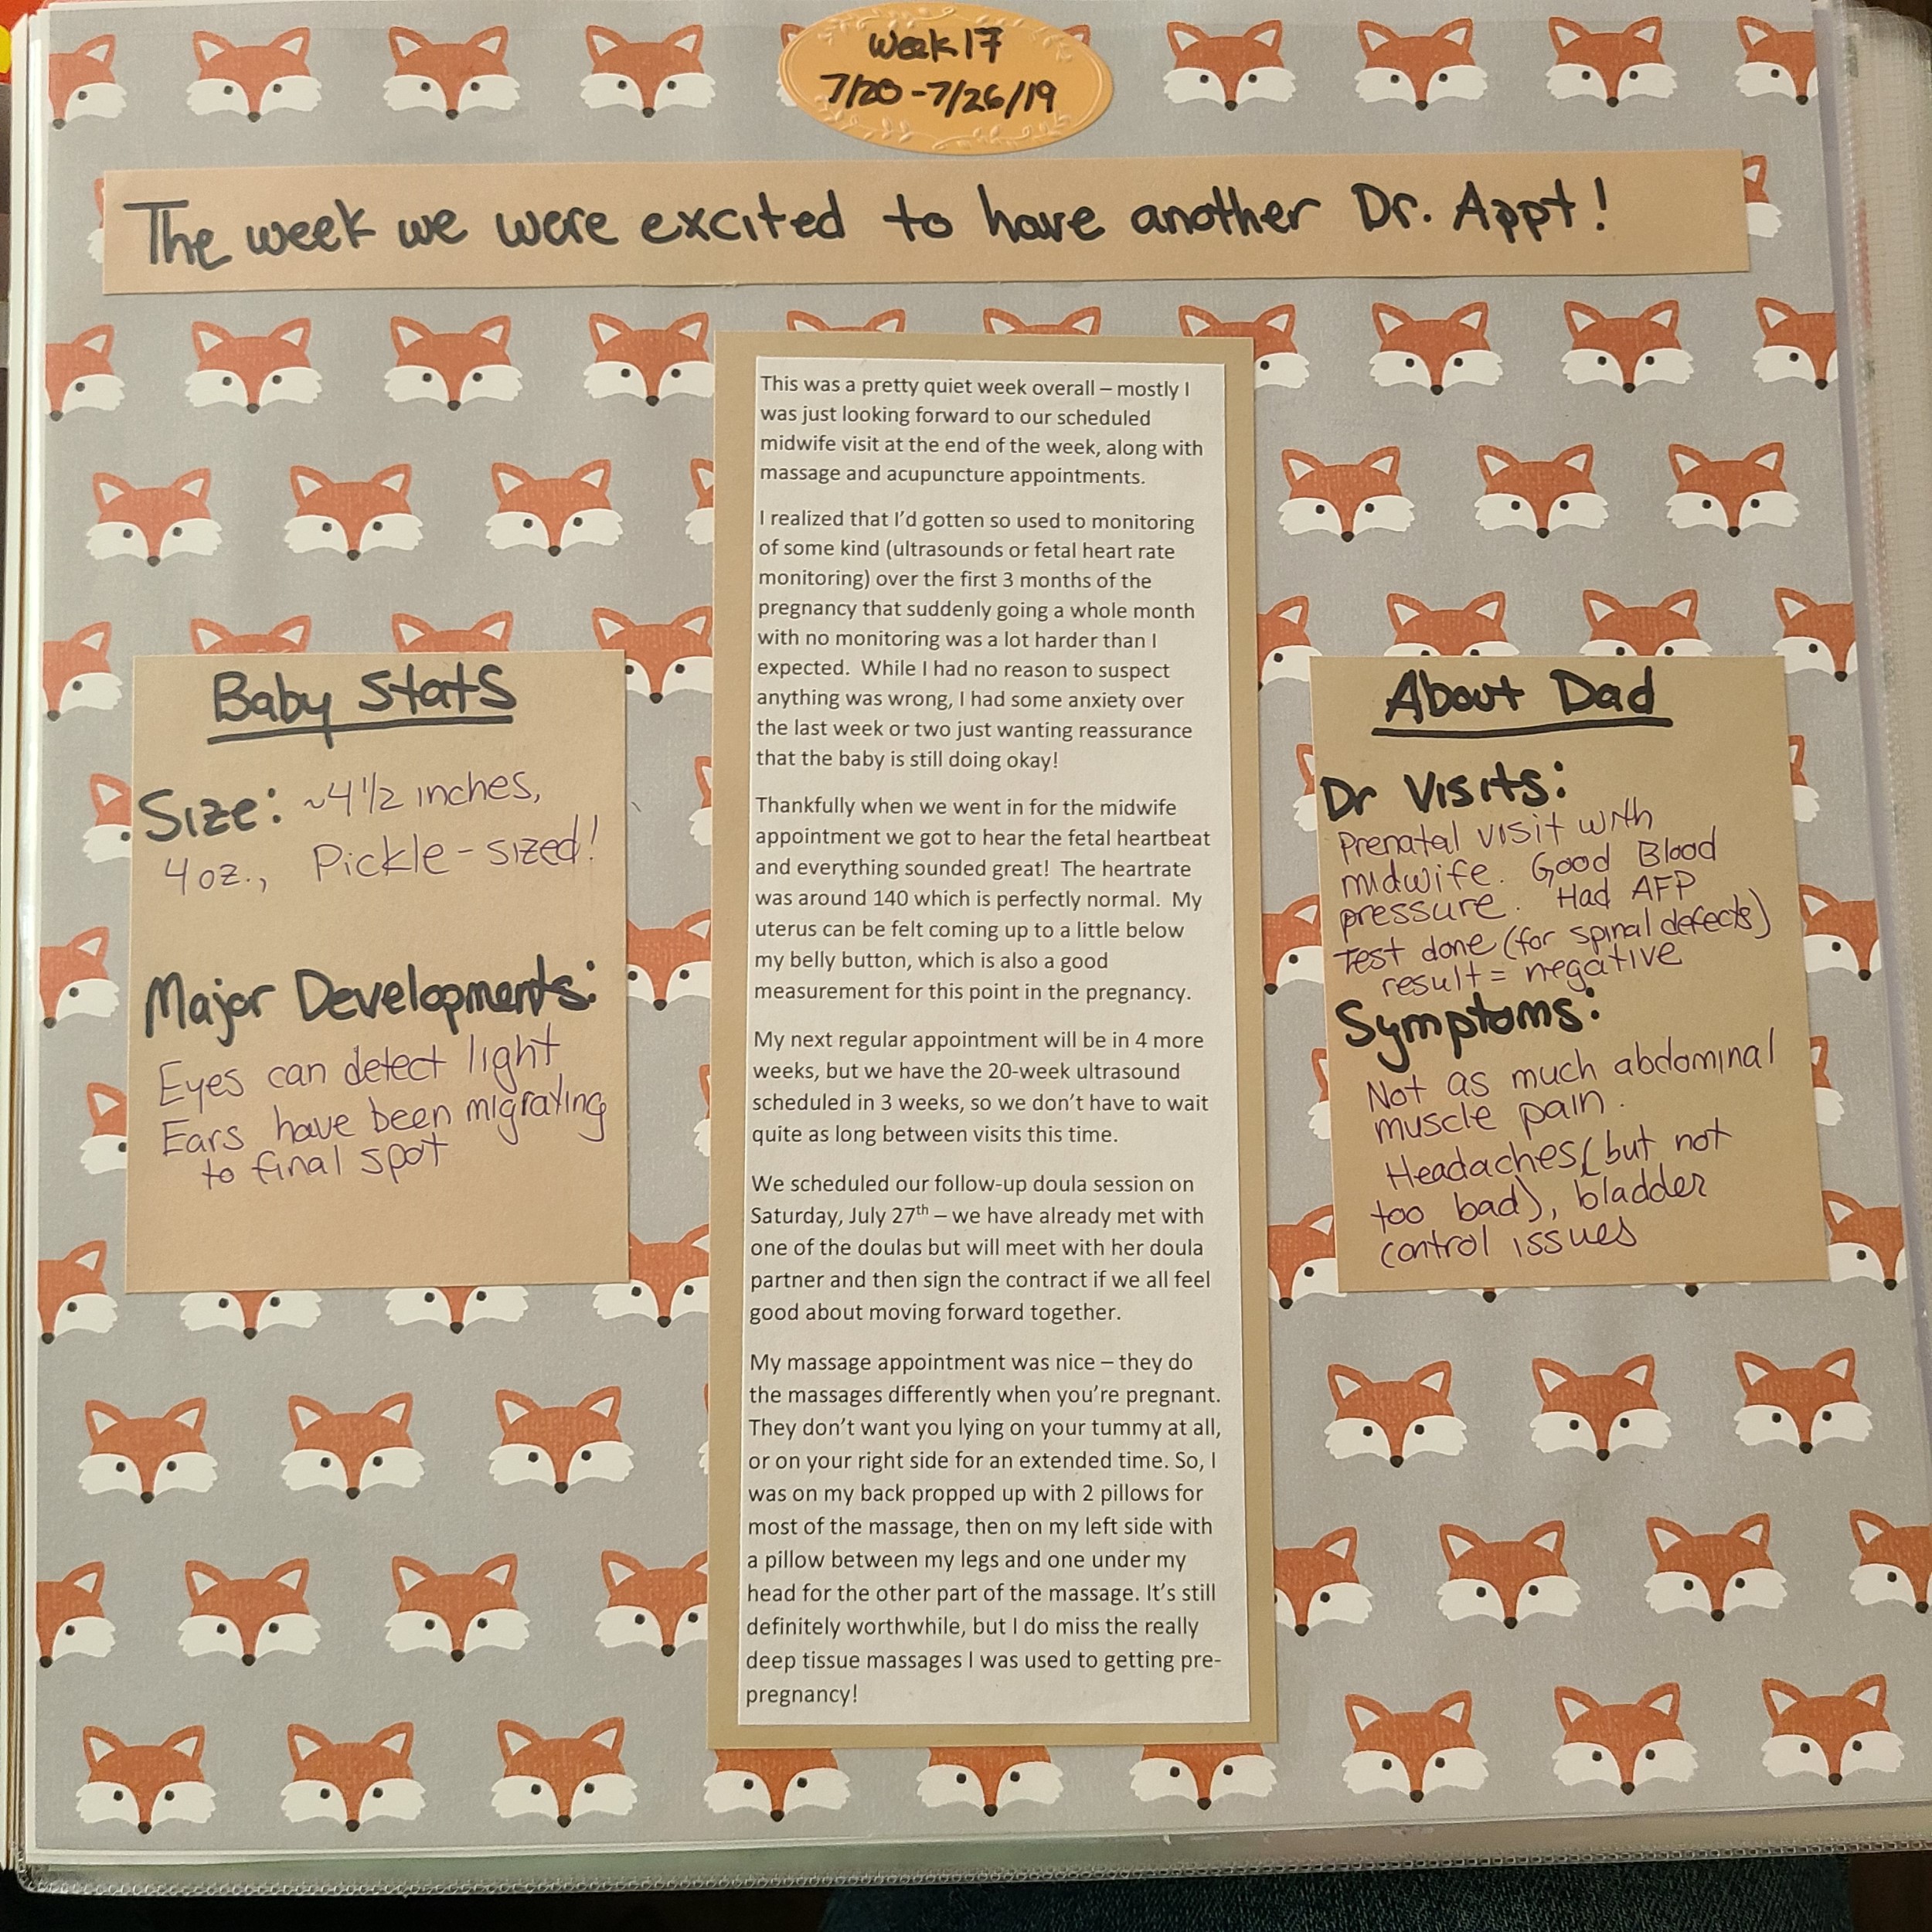 Week 17 scrapbook page - background are small, cute, evenly spread red and white illustrated fox heads, no pictures. 